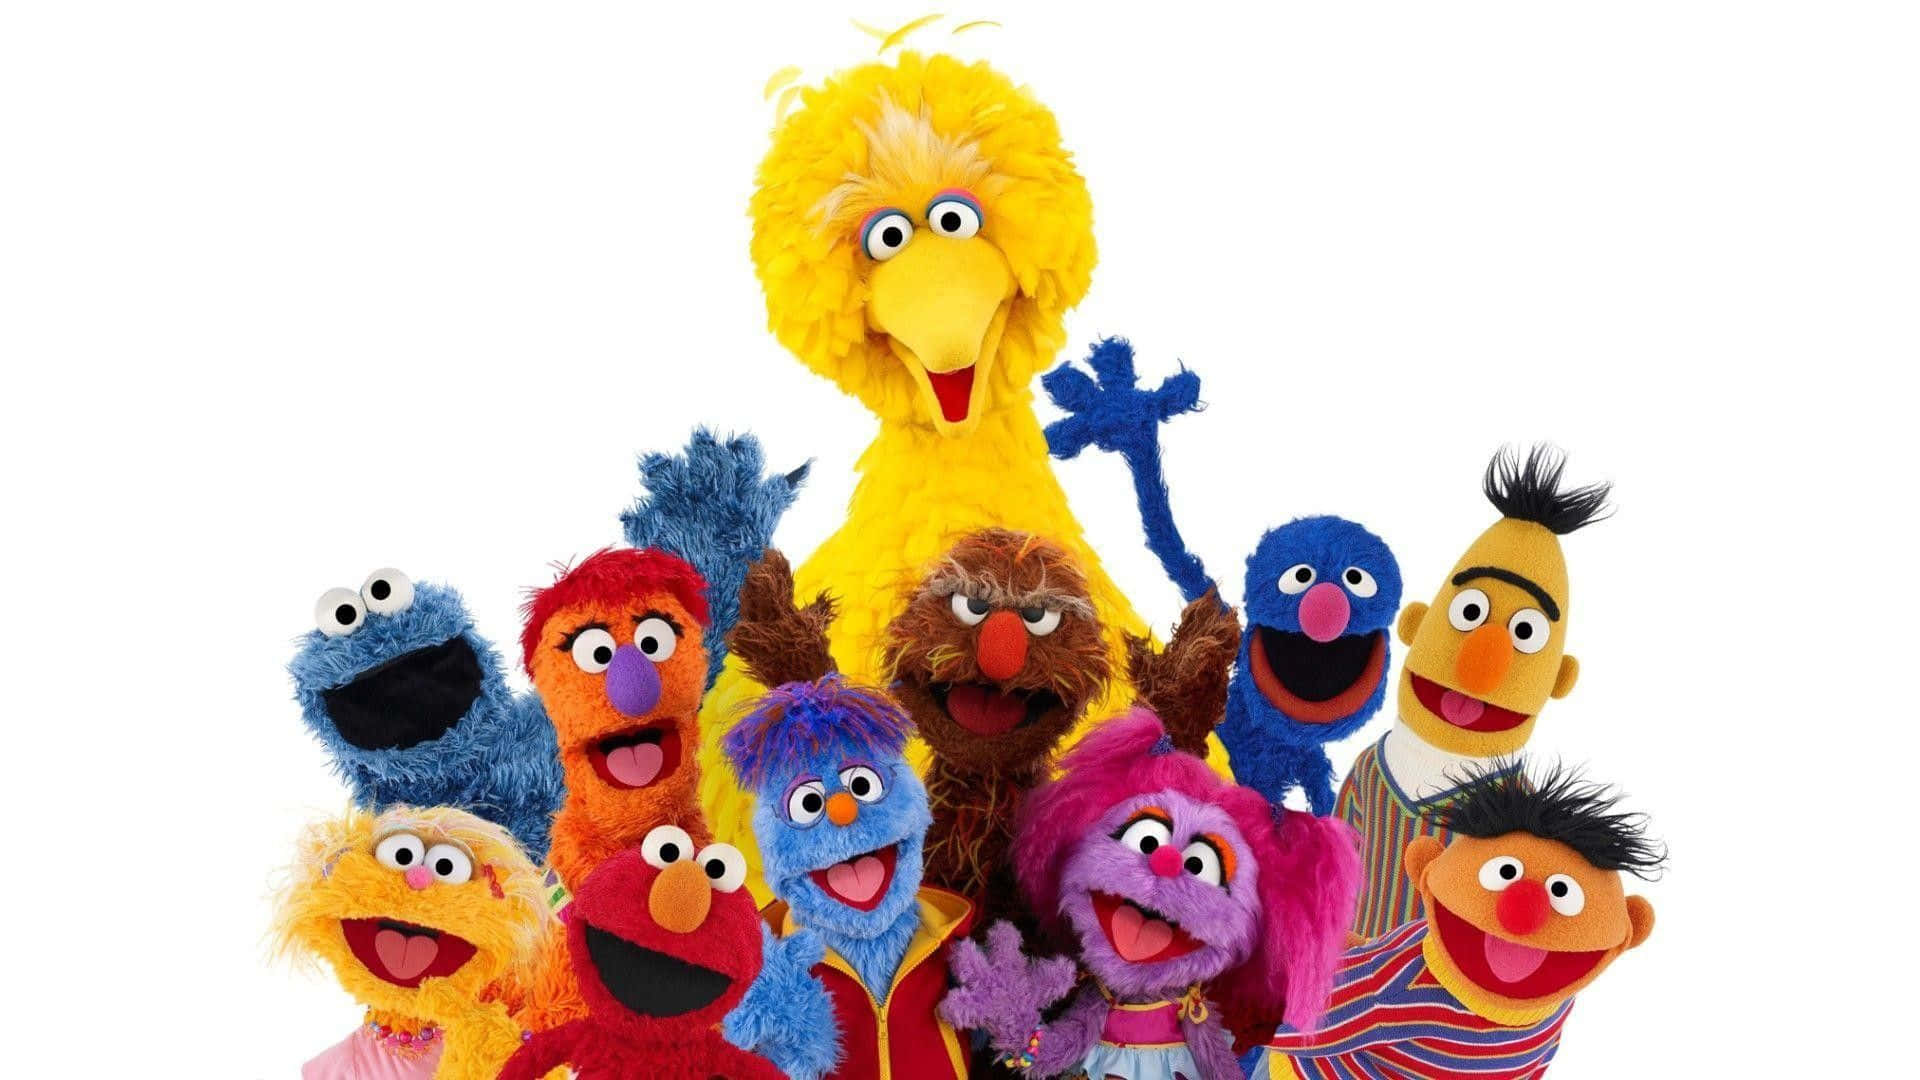 Explore the colorful world of Sesame Street